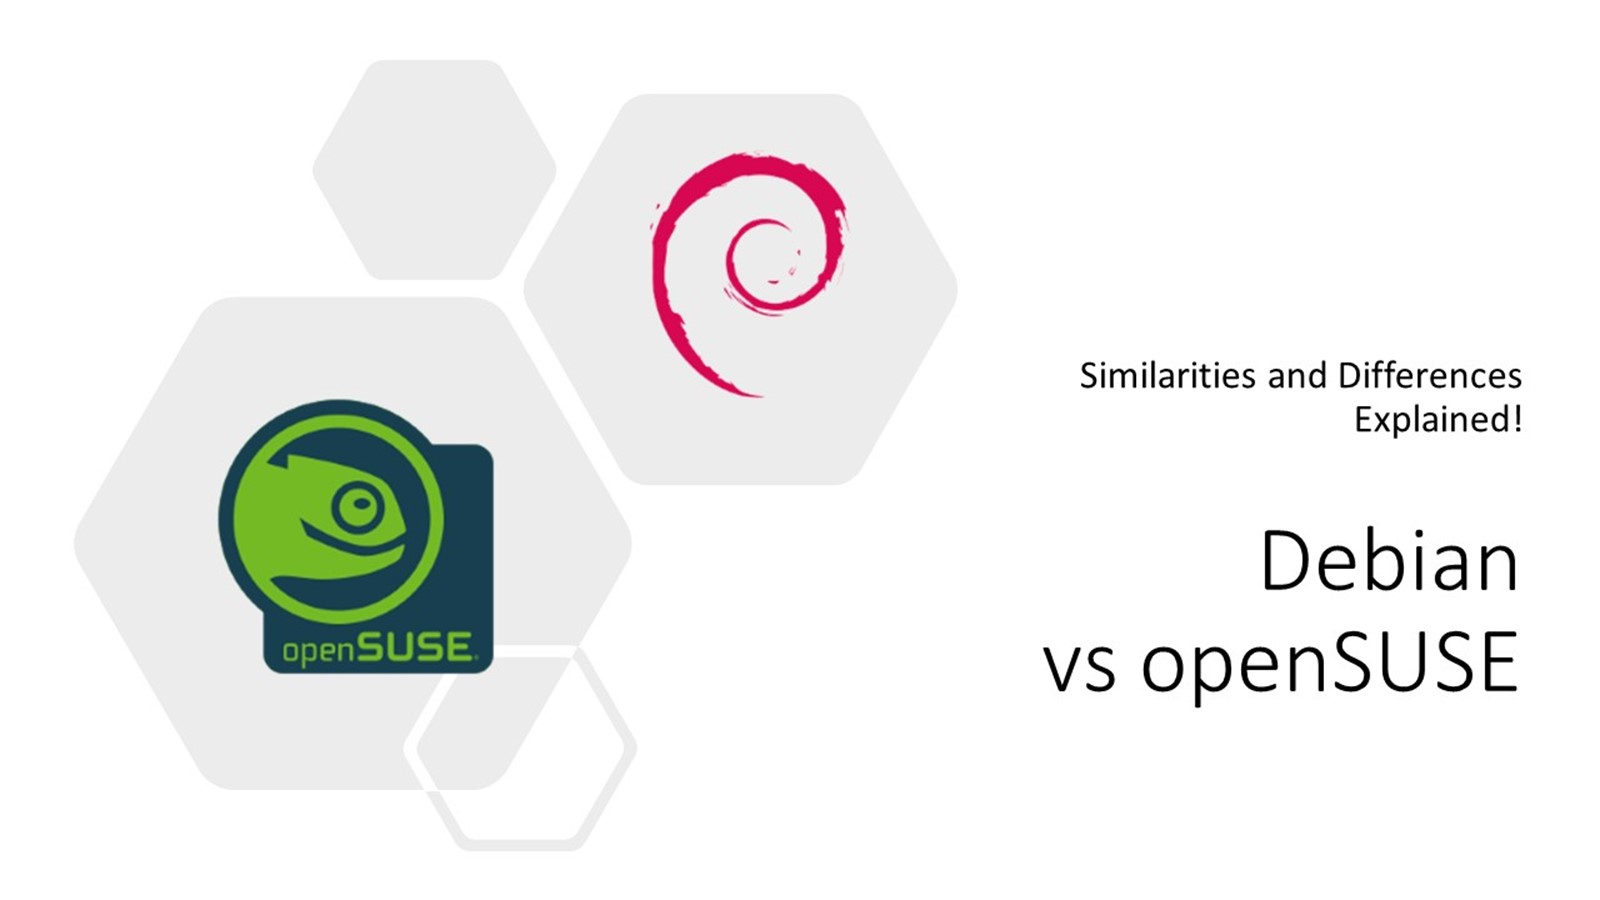 Debian vs OpenSUSE: Similarities & Differences!